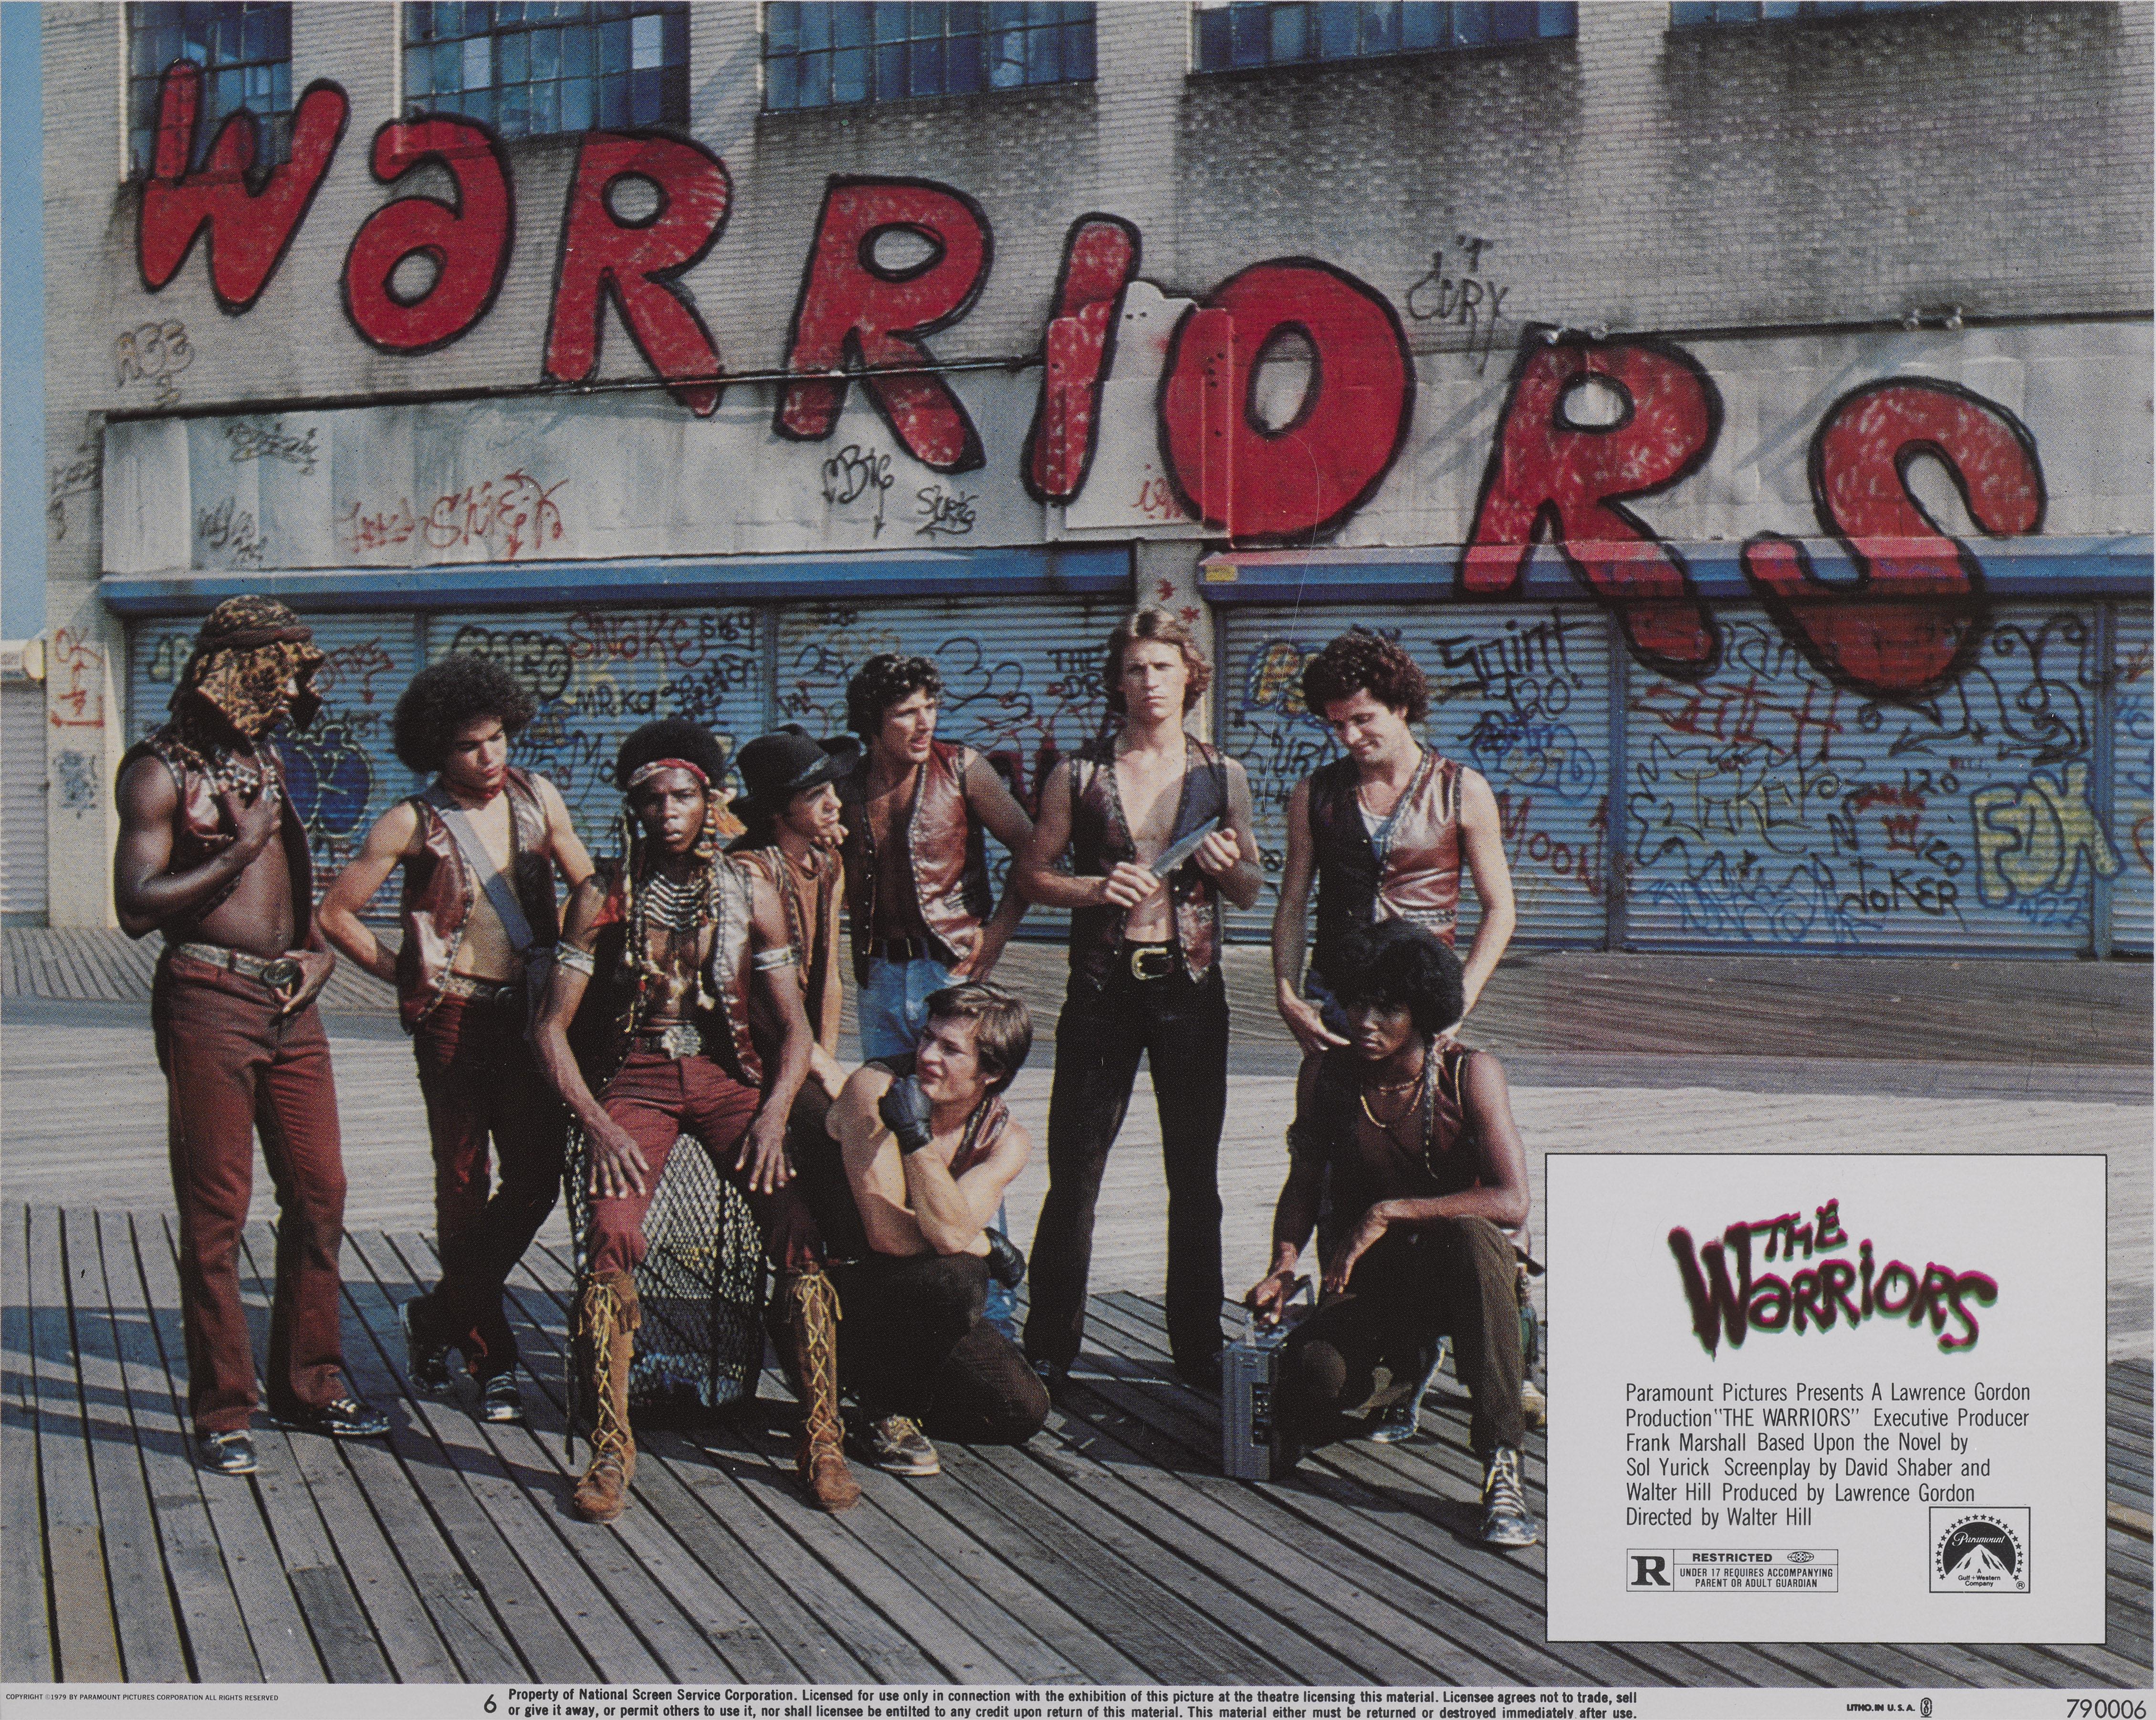 Original US lobby card for the 1979 film The Warriors.
This film starred Michael Beck, James Remar and Dorsey Wright.
The film was directed by Roy Walter Hill.
This lobby card is conservation framed with UV plexiglass in an Obeche wood frame with